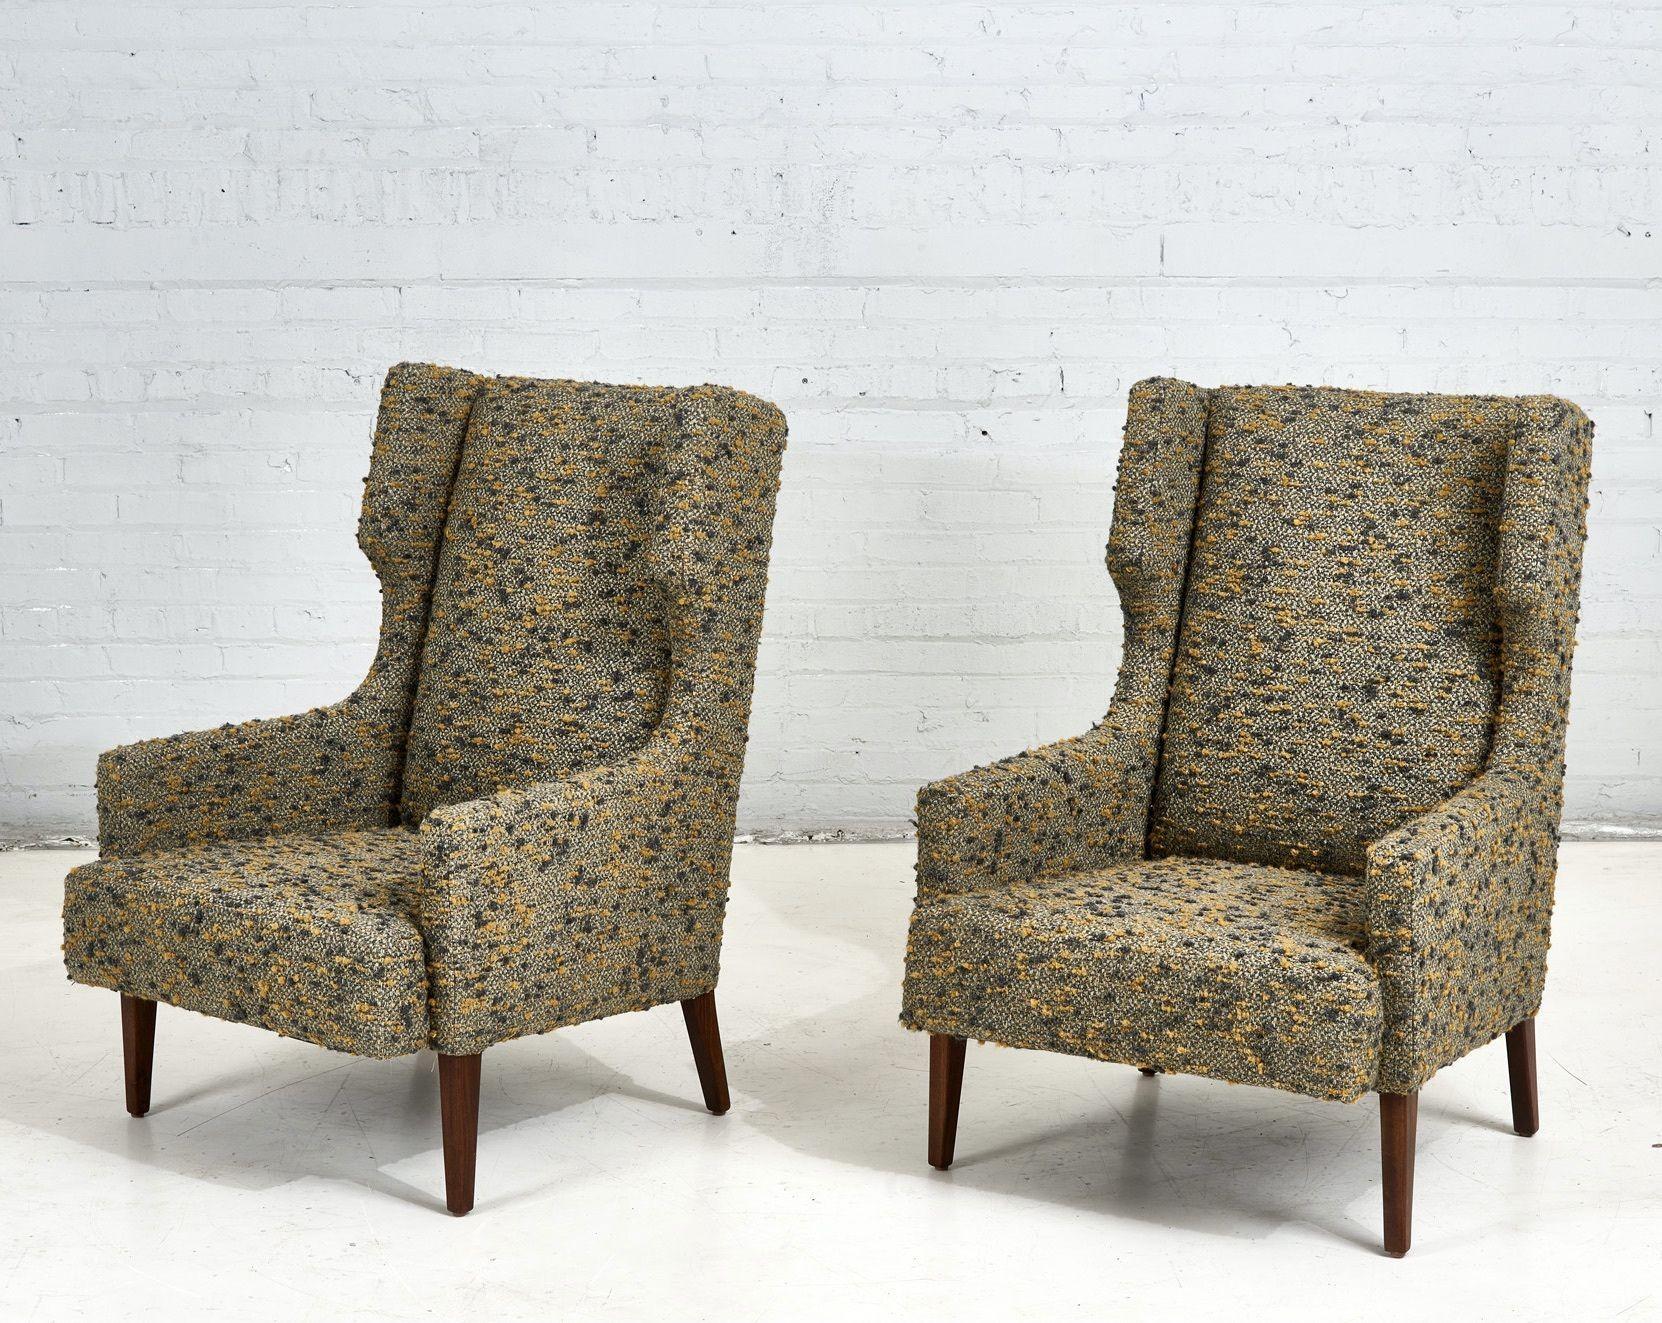 Pair of high back wing lounge chairs in the style of Dunbar, 1960. Fully restored. Newly reupholstered in textured nubby boucle with refinished walnut legs. Similar to Edward Wormley designs for Dunbar of the same era.